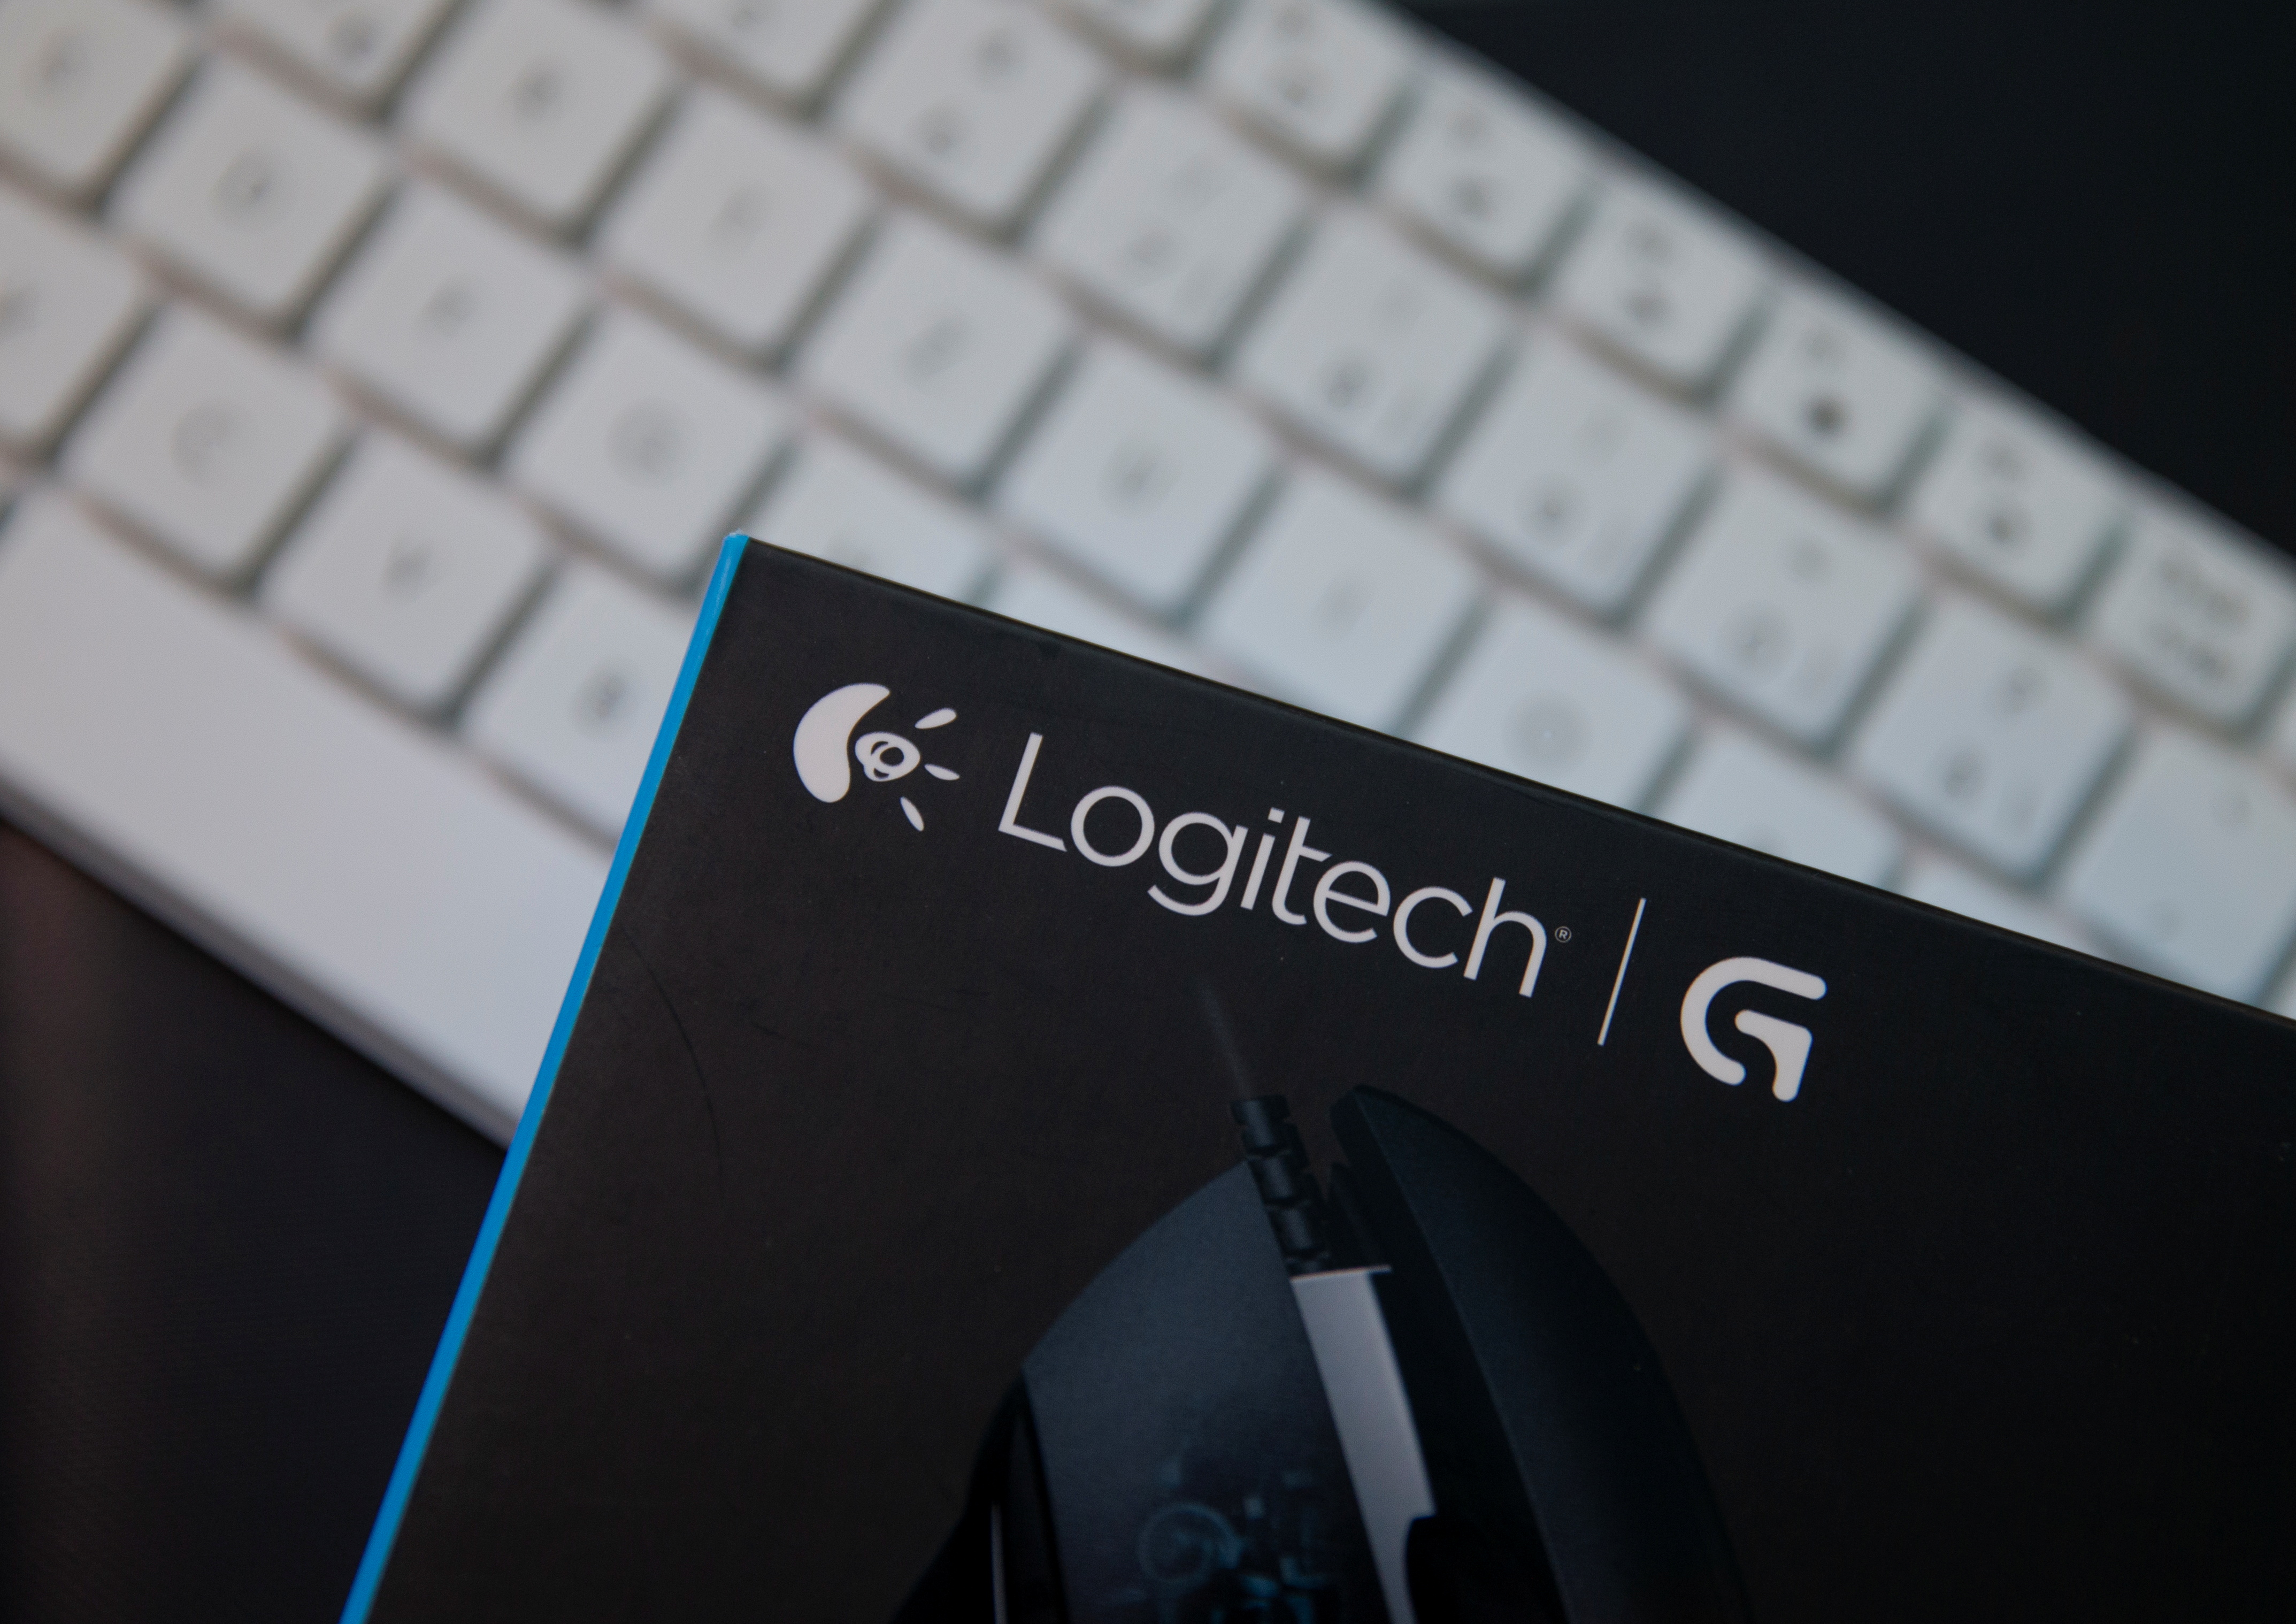 Computer mouse maker Logitech hit by supply chain problems | Reuters